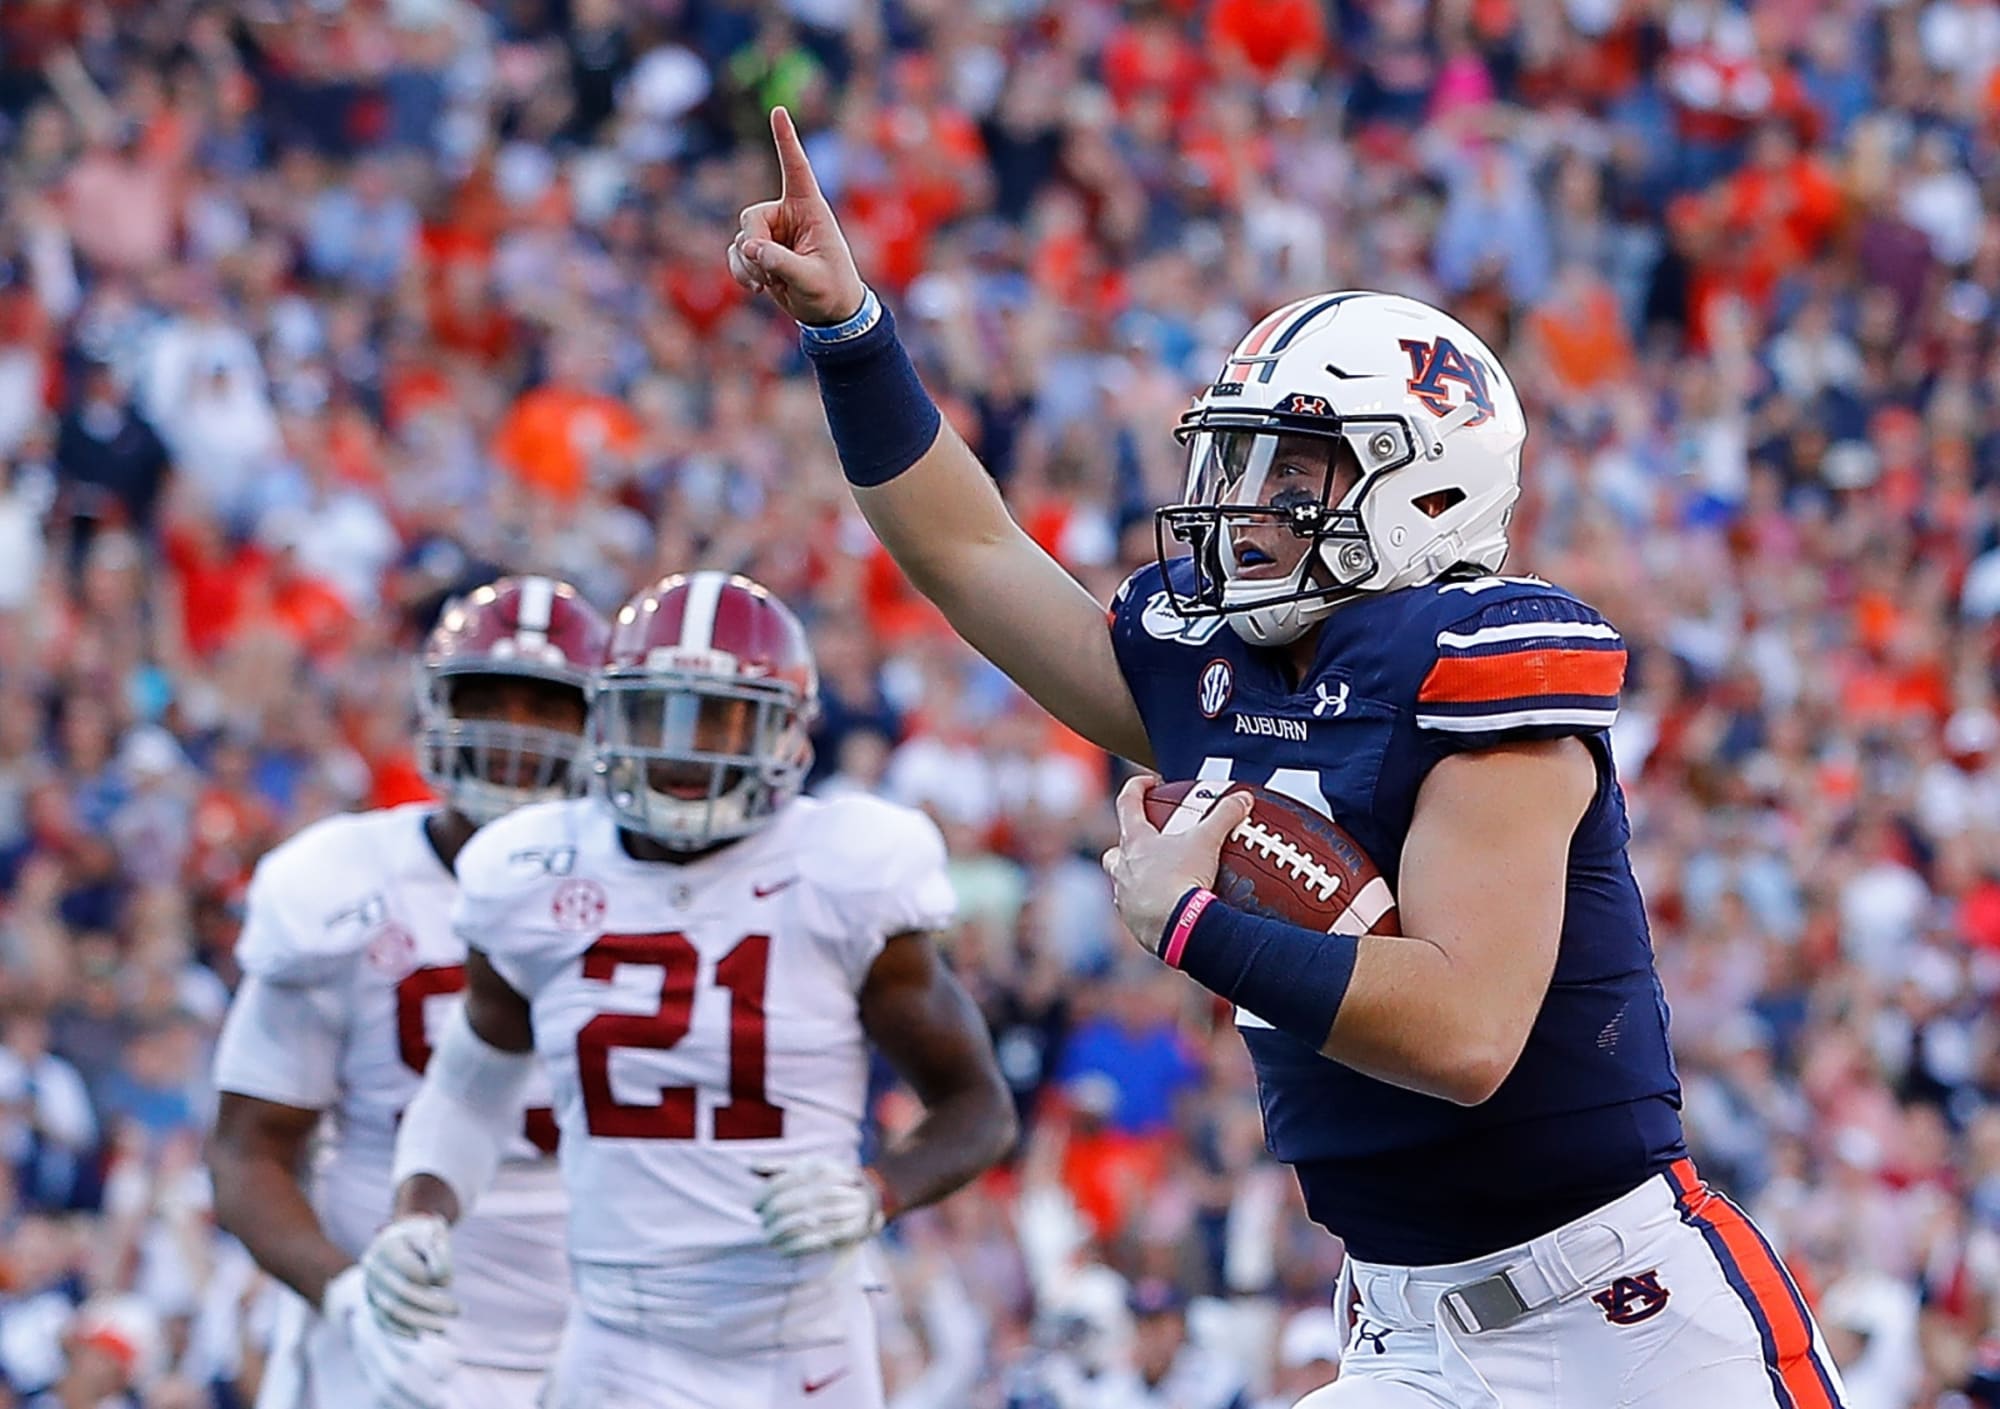 SEC officiating gifts Auburn free field goal in Iron Bowl, Nick Saban irate